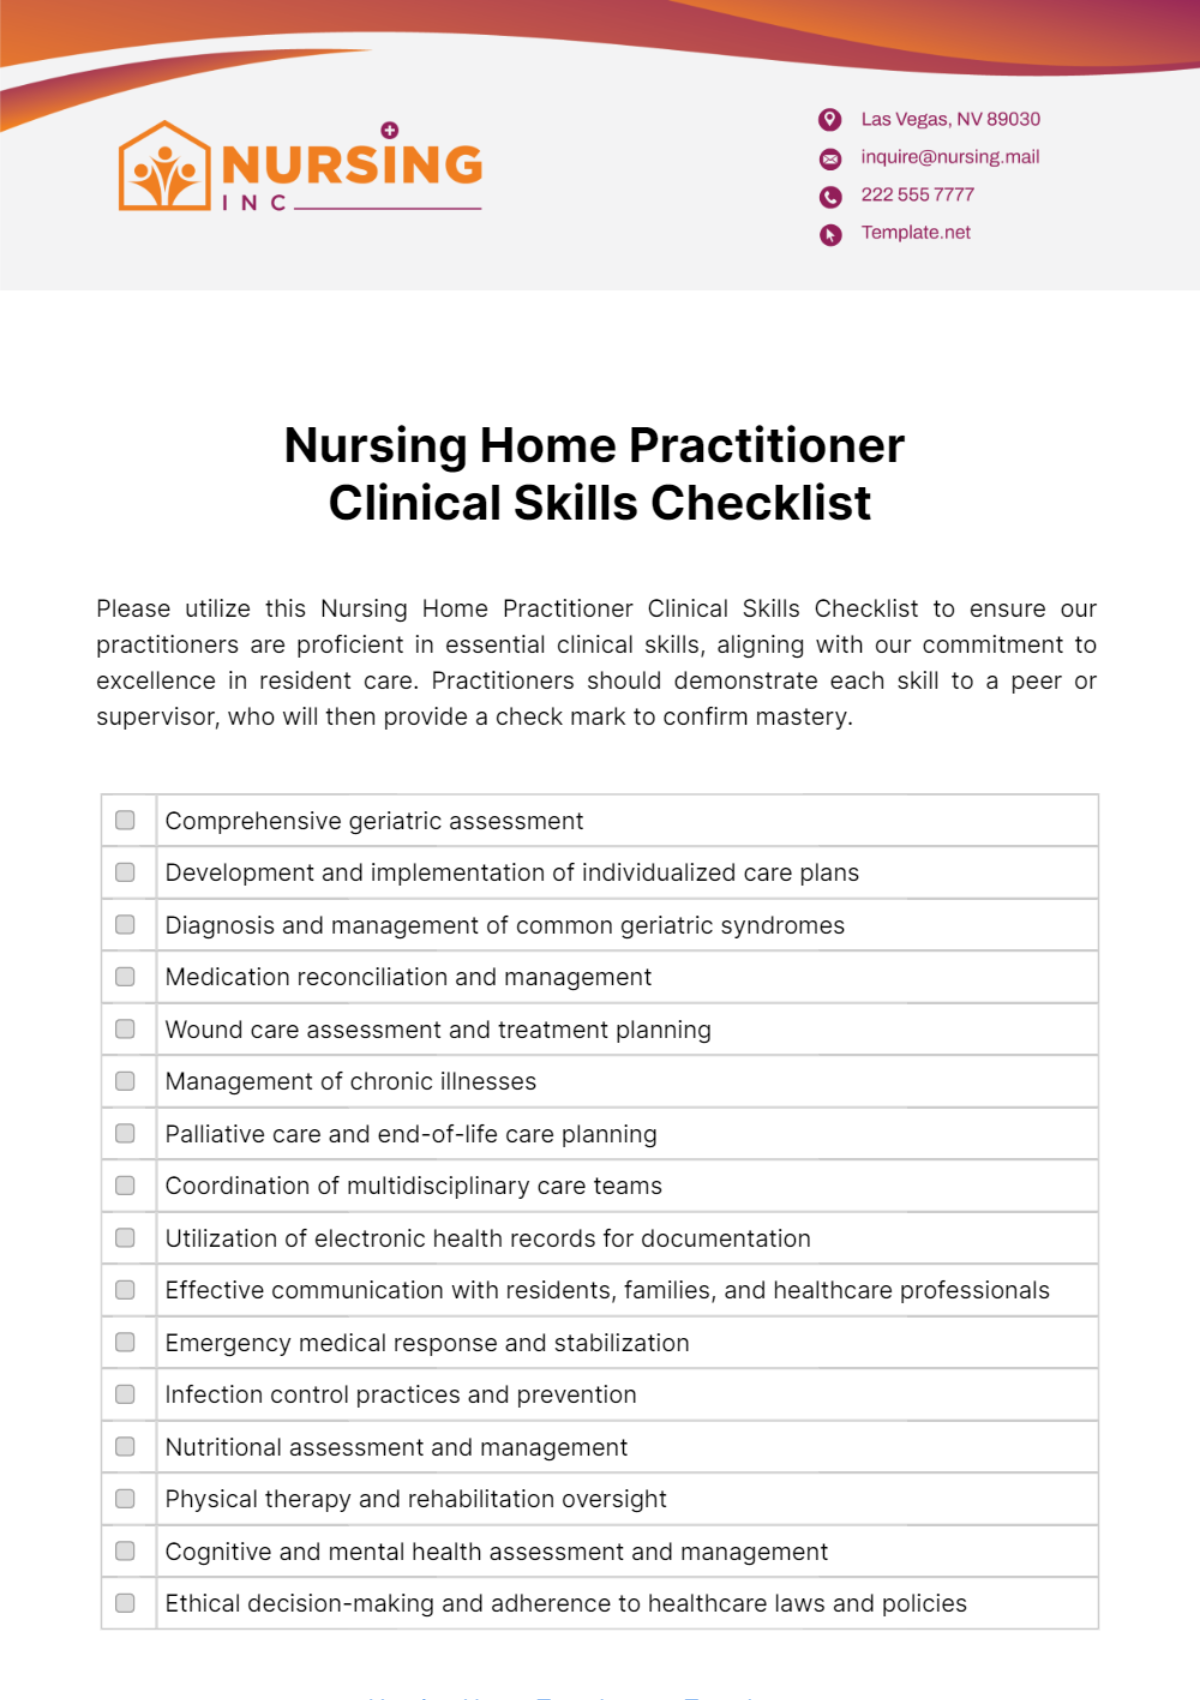 Nursing Home Practitioner Clinical Skills Checklist Template